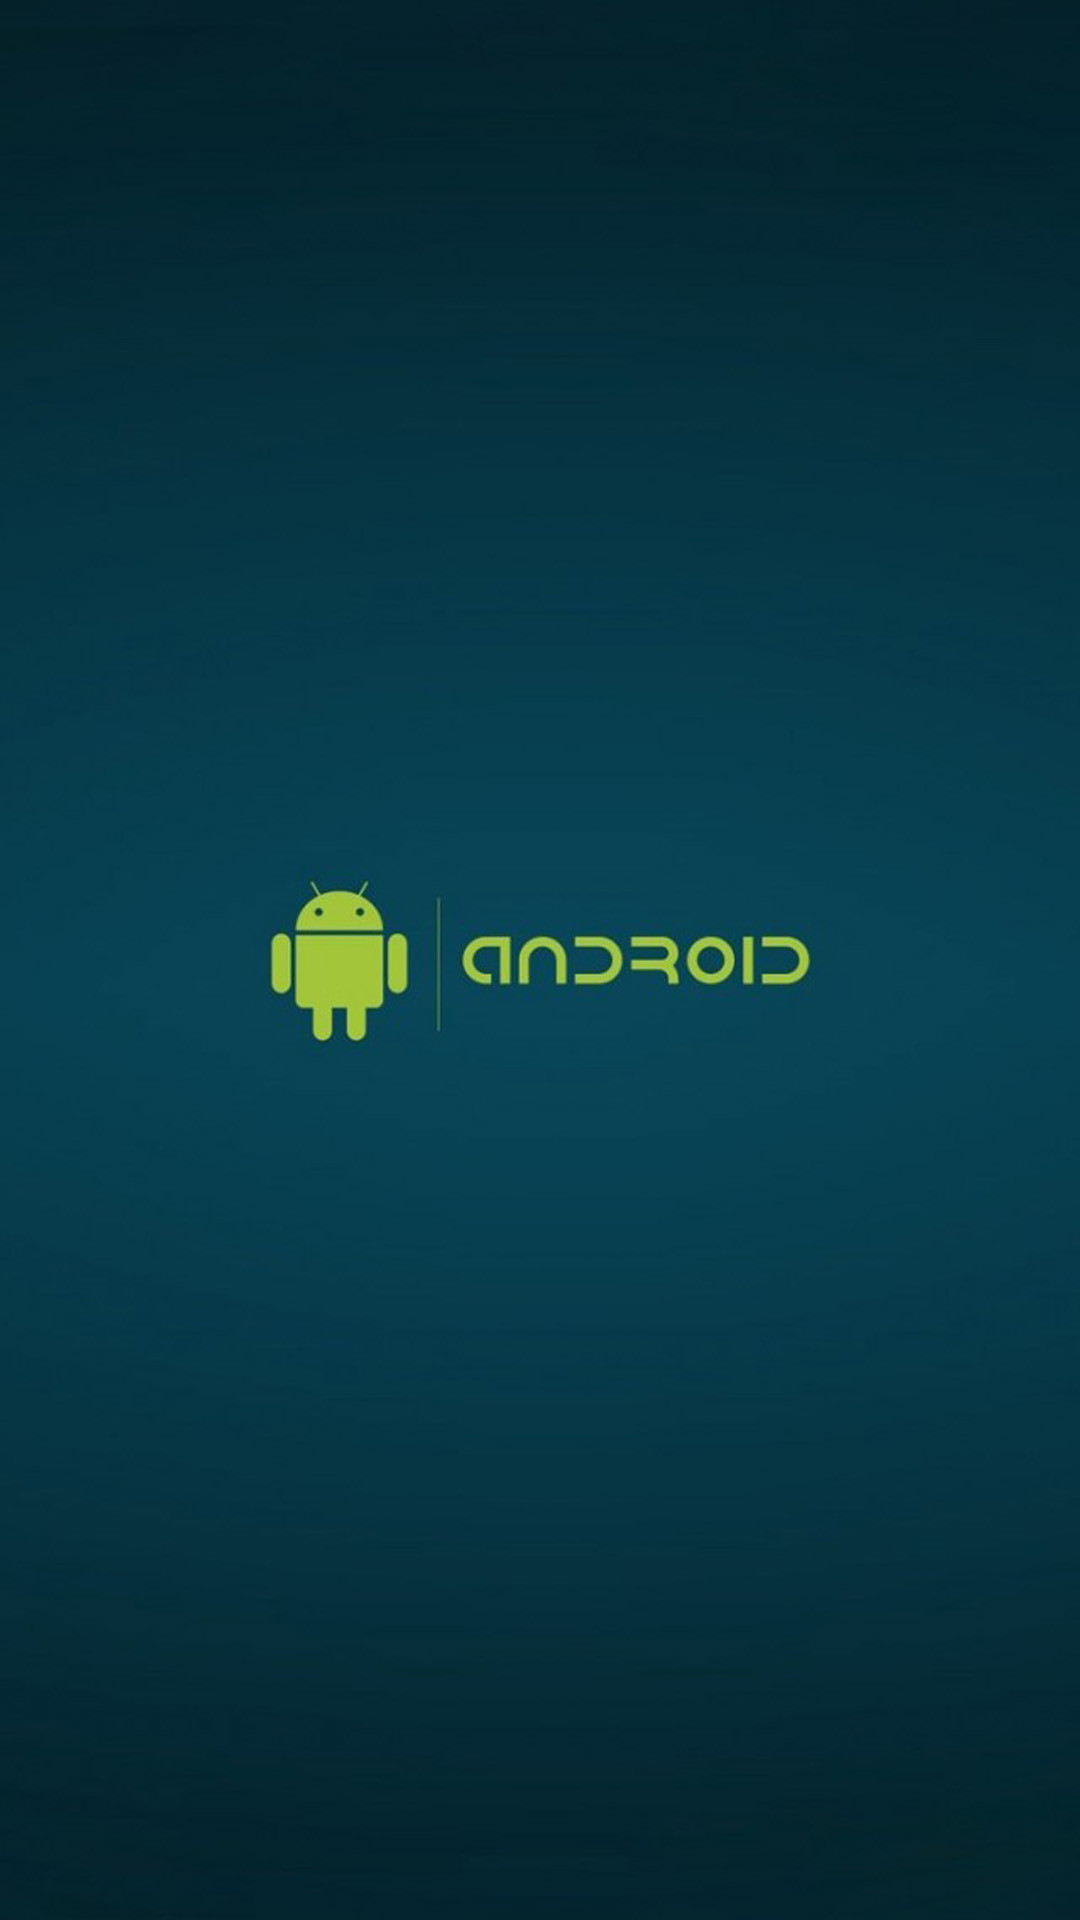 1080x1920 Android LOGO 01 S4 Wallpapers